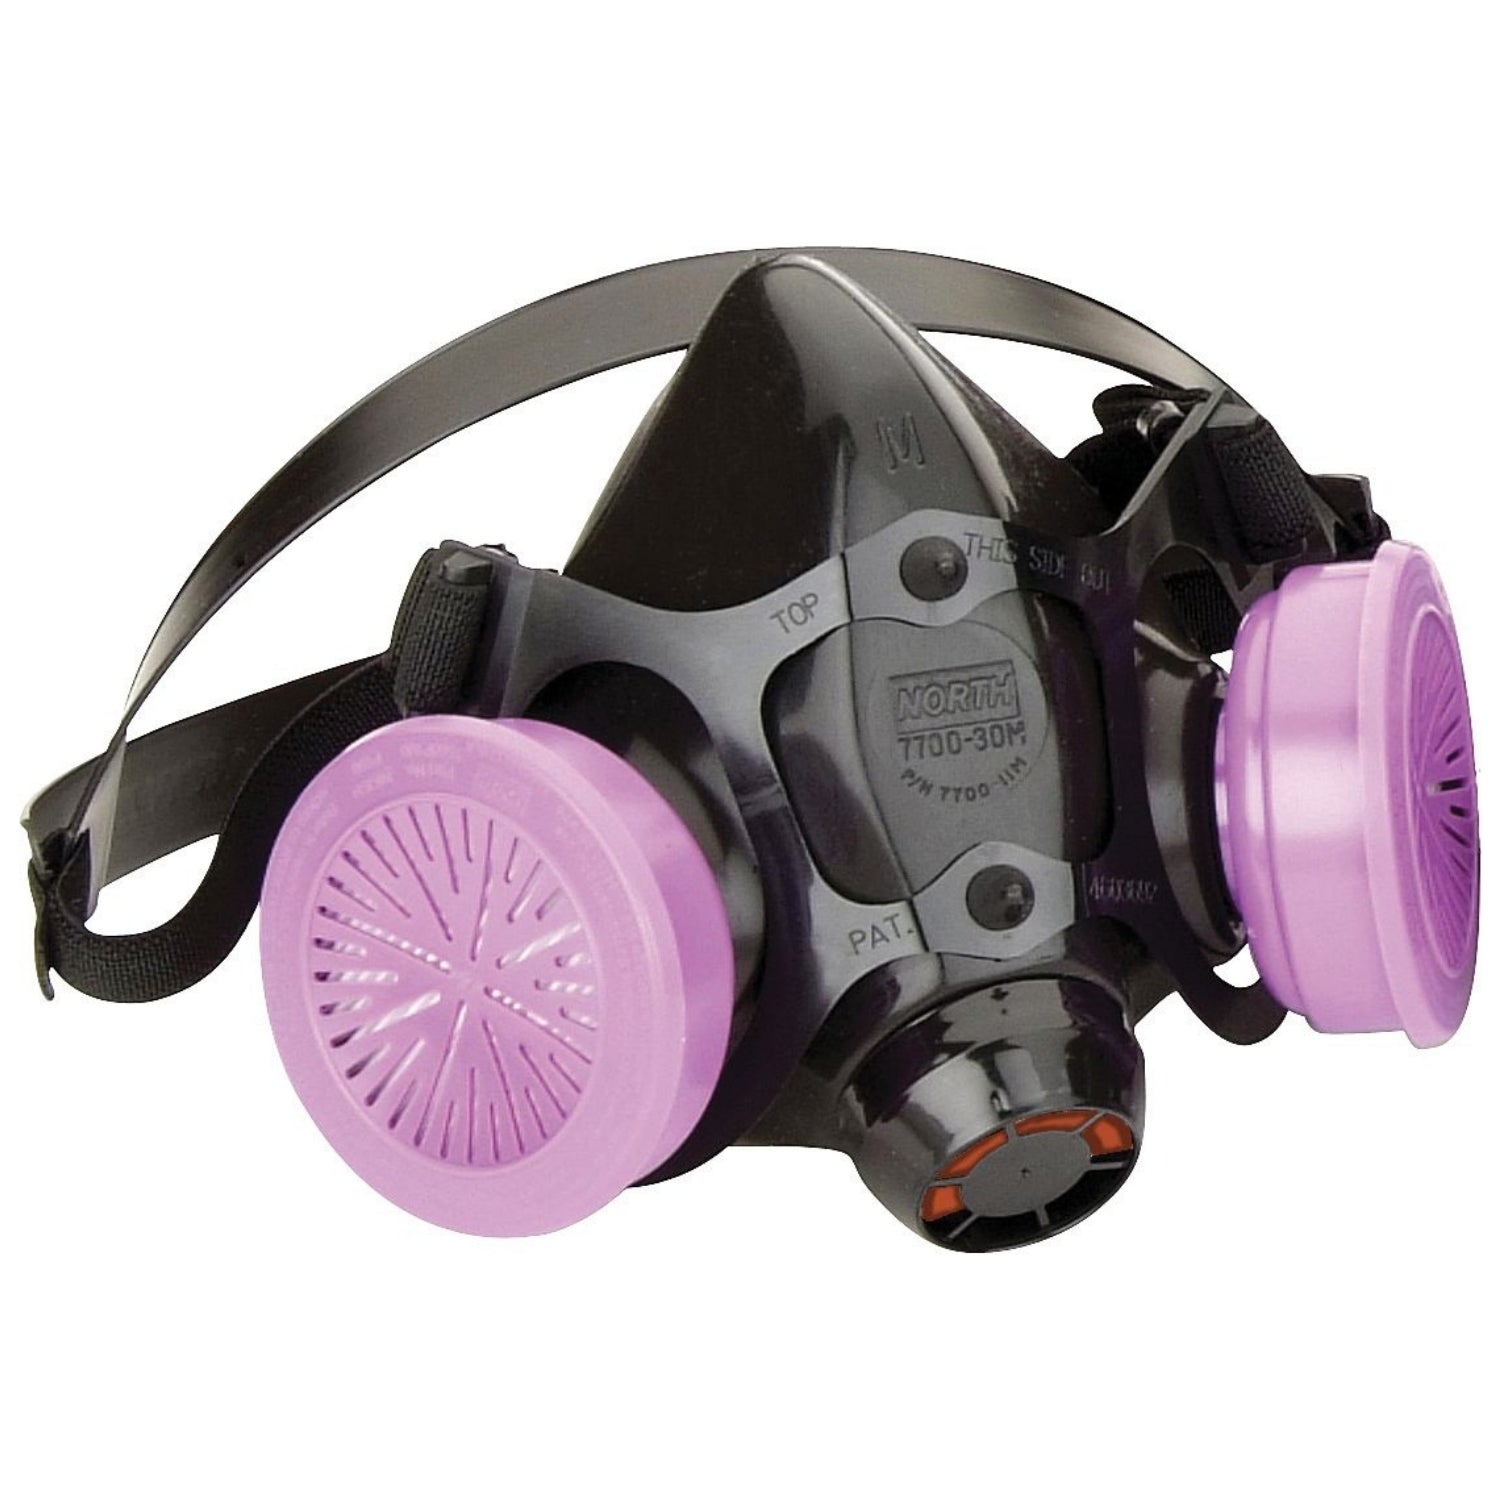 HONEYWELL  7700 Series Half Mask Respirator - Resists Particulates, Chemical, Contamination and Gas, Cradle Suspension, Silicone - Size Medium